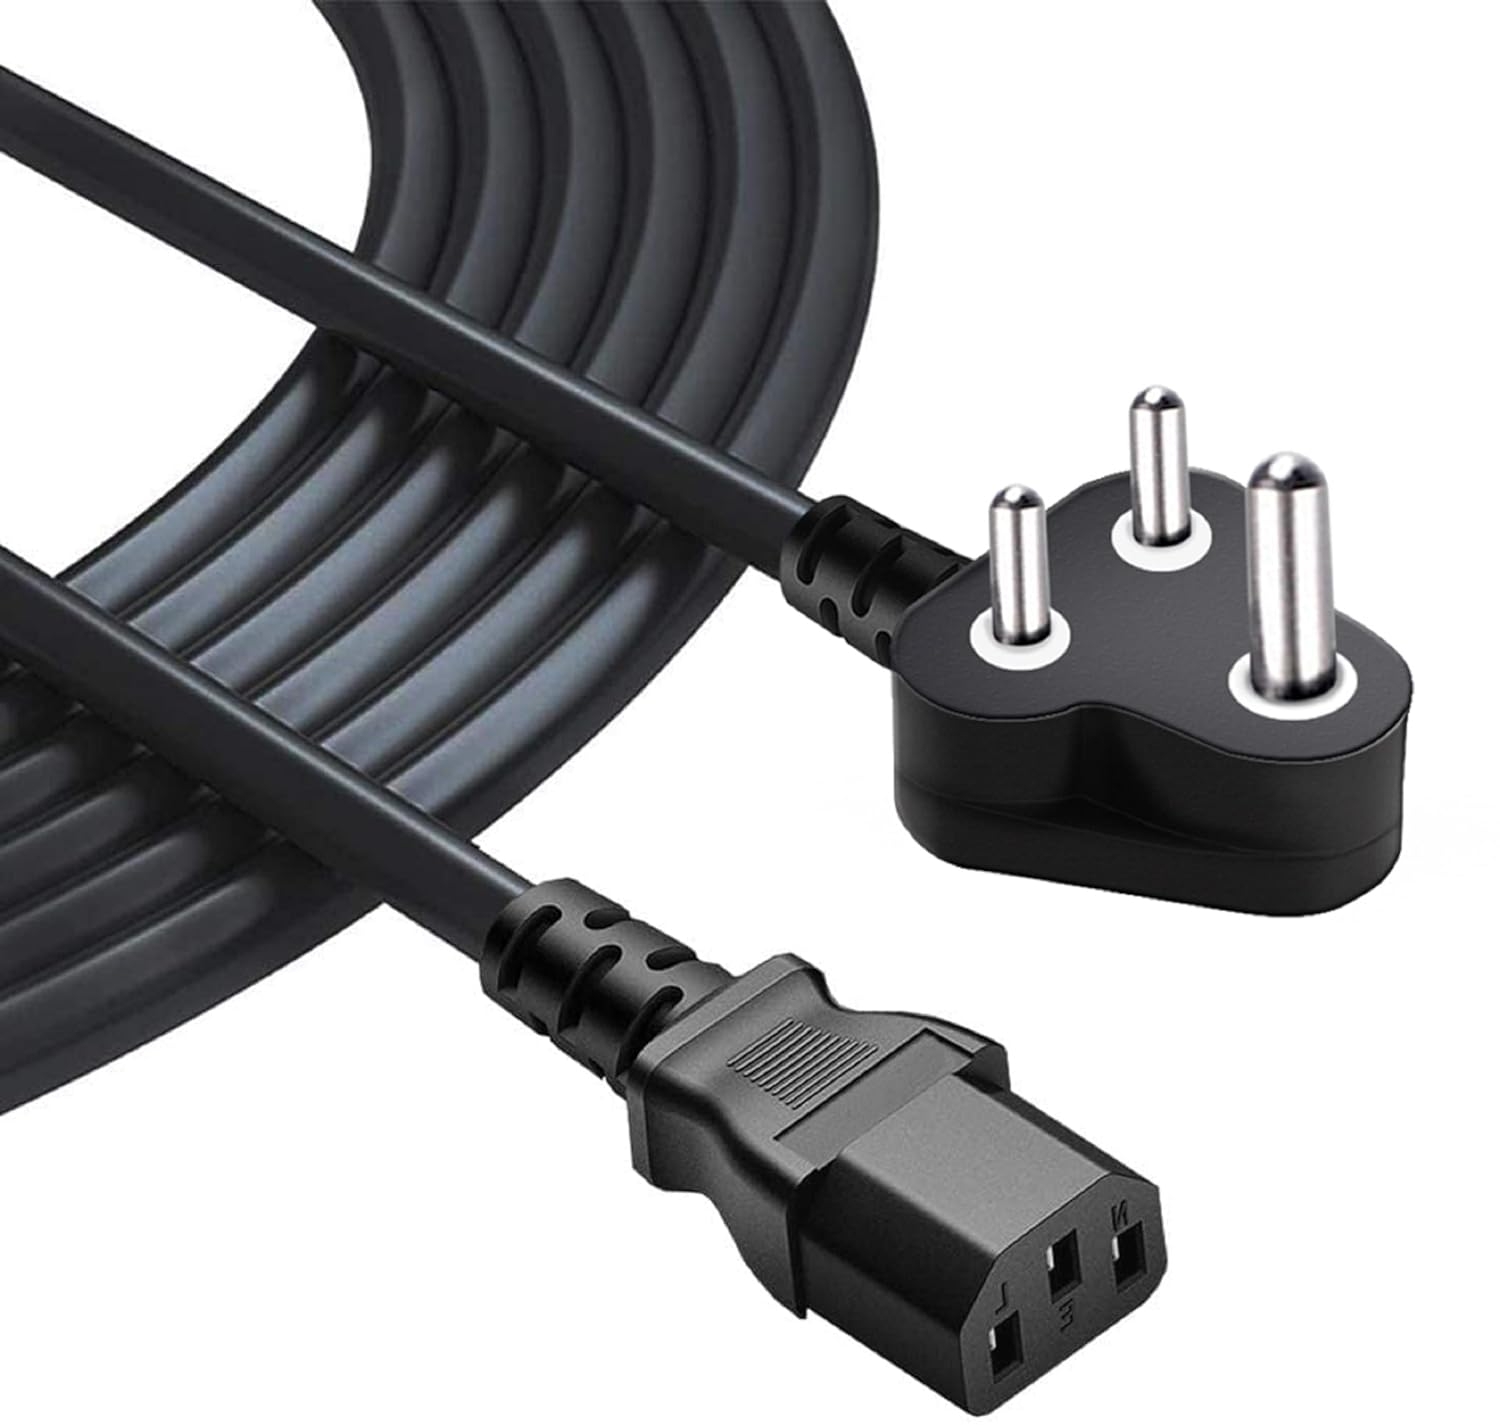 TECH-X Power Cord | 3 pin Power Cable for Desktop, PC, Monitor, SMPS & Printer, Power Supply (5M 16Feet)